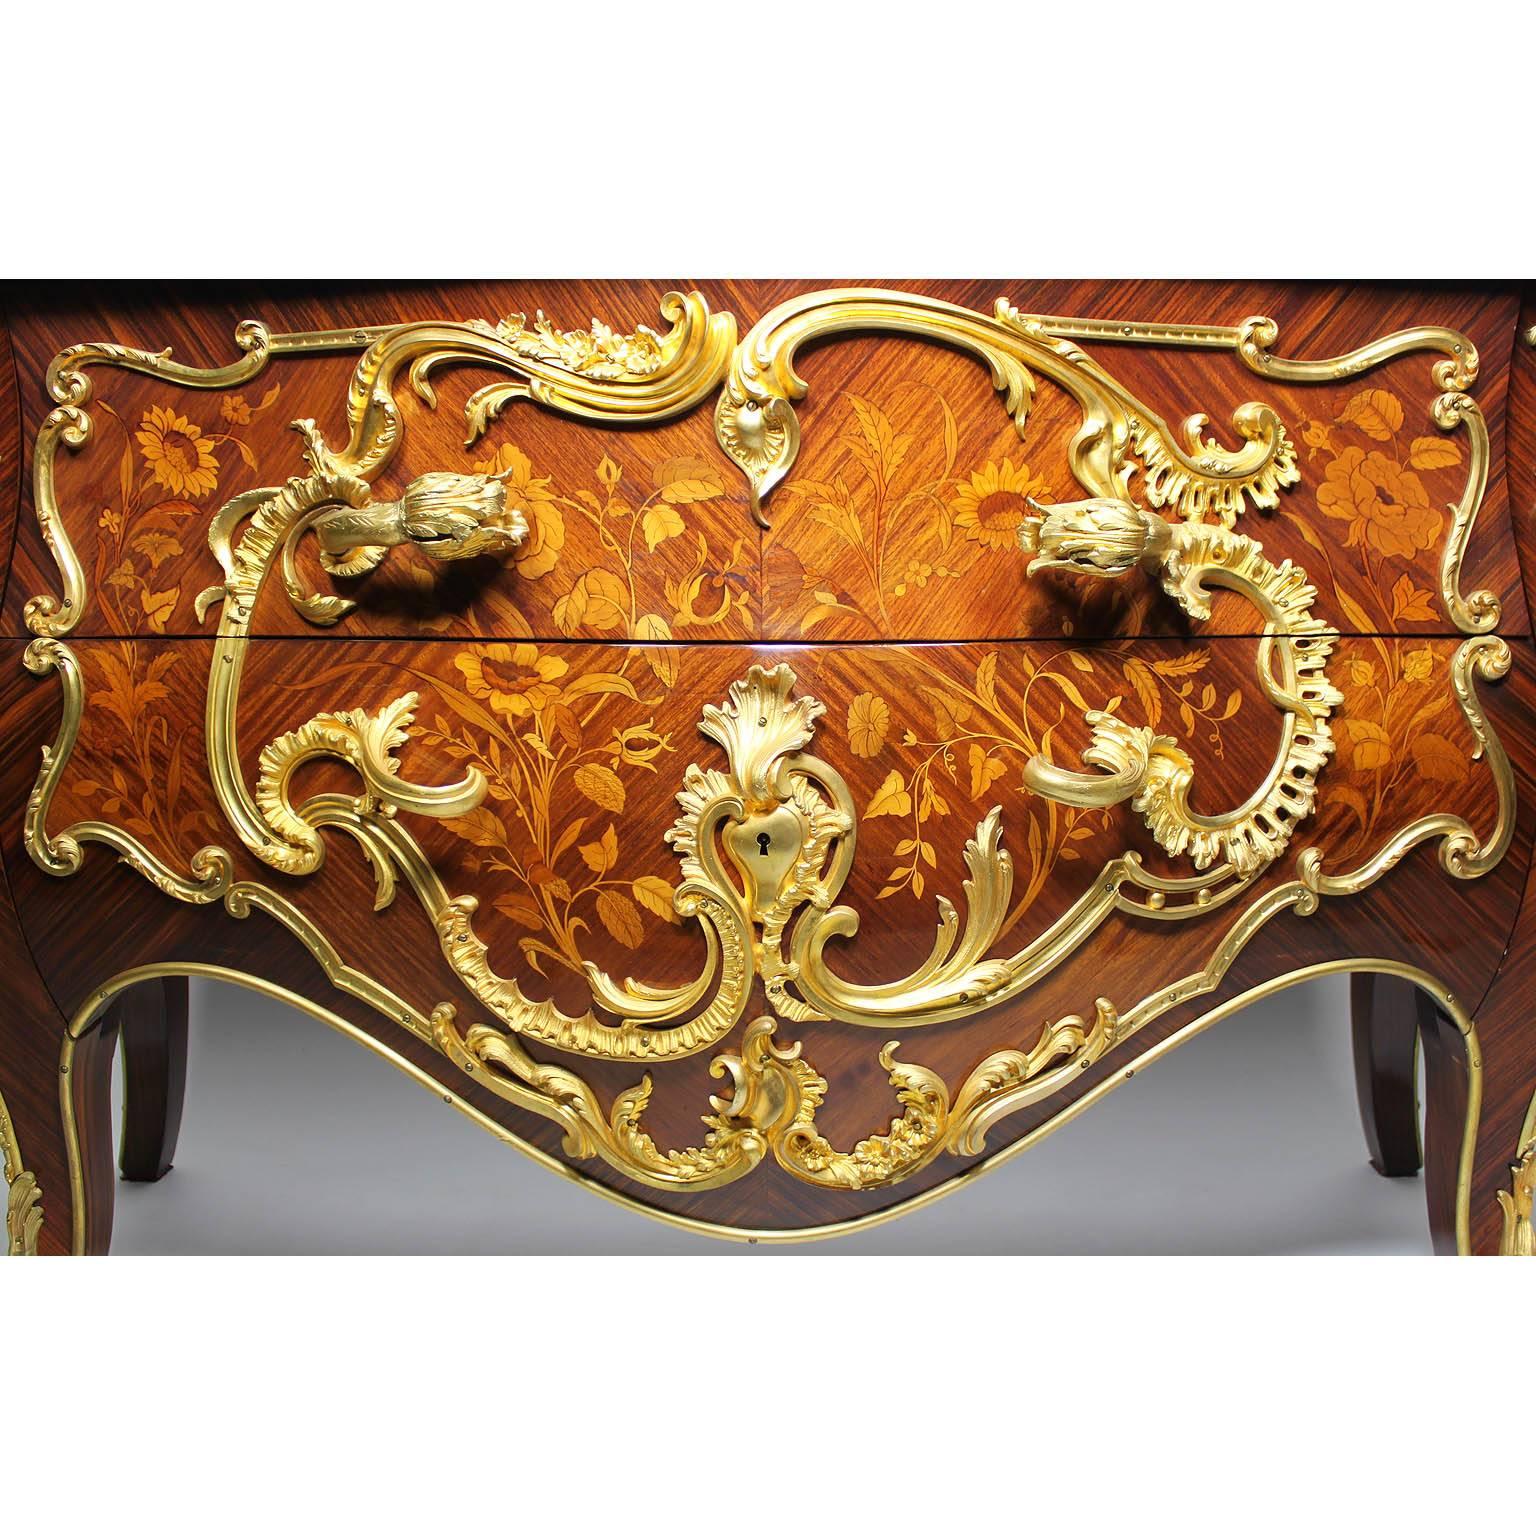 A very fine French mid-19th century Louis XV style gilt bronze-mounted tulipwood, kingwood and fruitwood marquetry bombé two-drawer commode with marble top, by Bourdet, Paris, After a model by Jean Baptiste Hedouin (French, 1738-1783). circa: Paris,